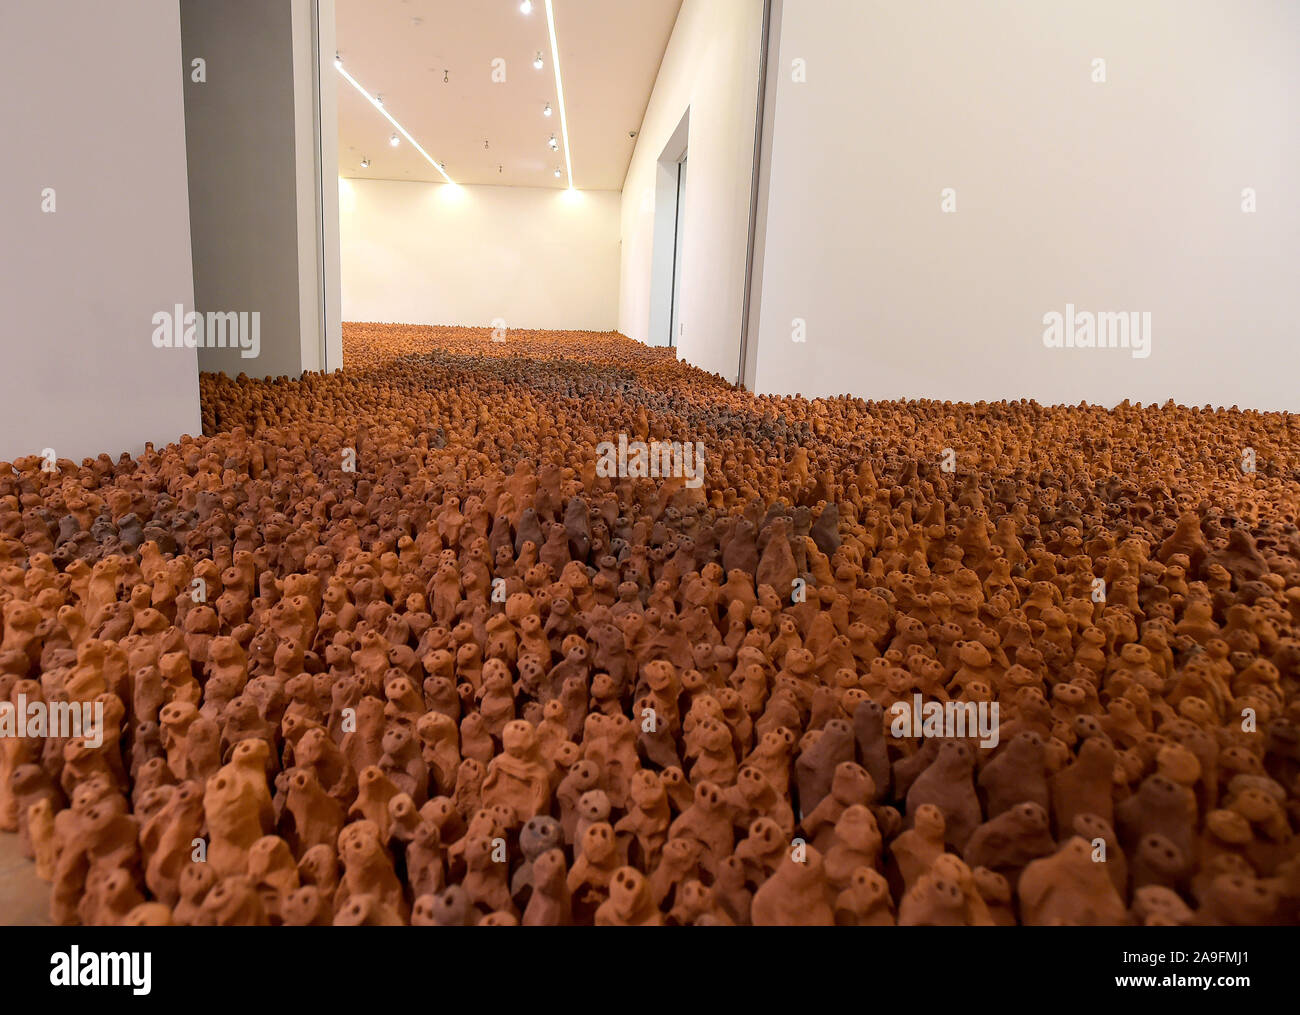 Colchester Essex UK 15th November 2019. The renowned Field for the British Isles, by Antony Gormley arrives at Firstsite Colchester in Essex. Field for The British Isles, which consists of 40,000 tiny individual terracotta figures, is the largest single artwork in the Arts Council Collection and its arrival in Colchester will herald the latest stage in the journey of this spectacular piece. Gormley, who won the Turner Prize in 1994 after this work was created, currently has a major solo exhibition at The Royal Academy. Credit: MARTIN DALTON/Alamy Live News Stock Photo